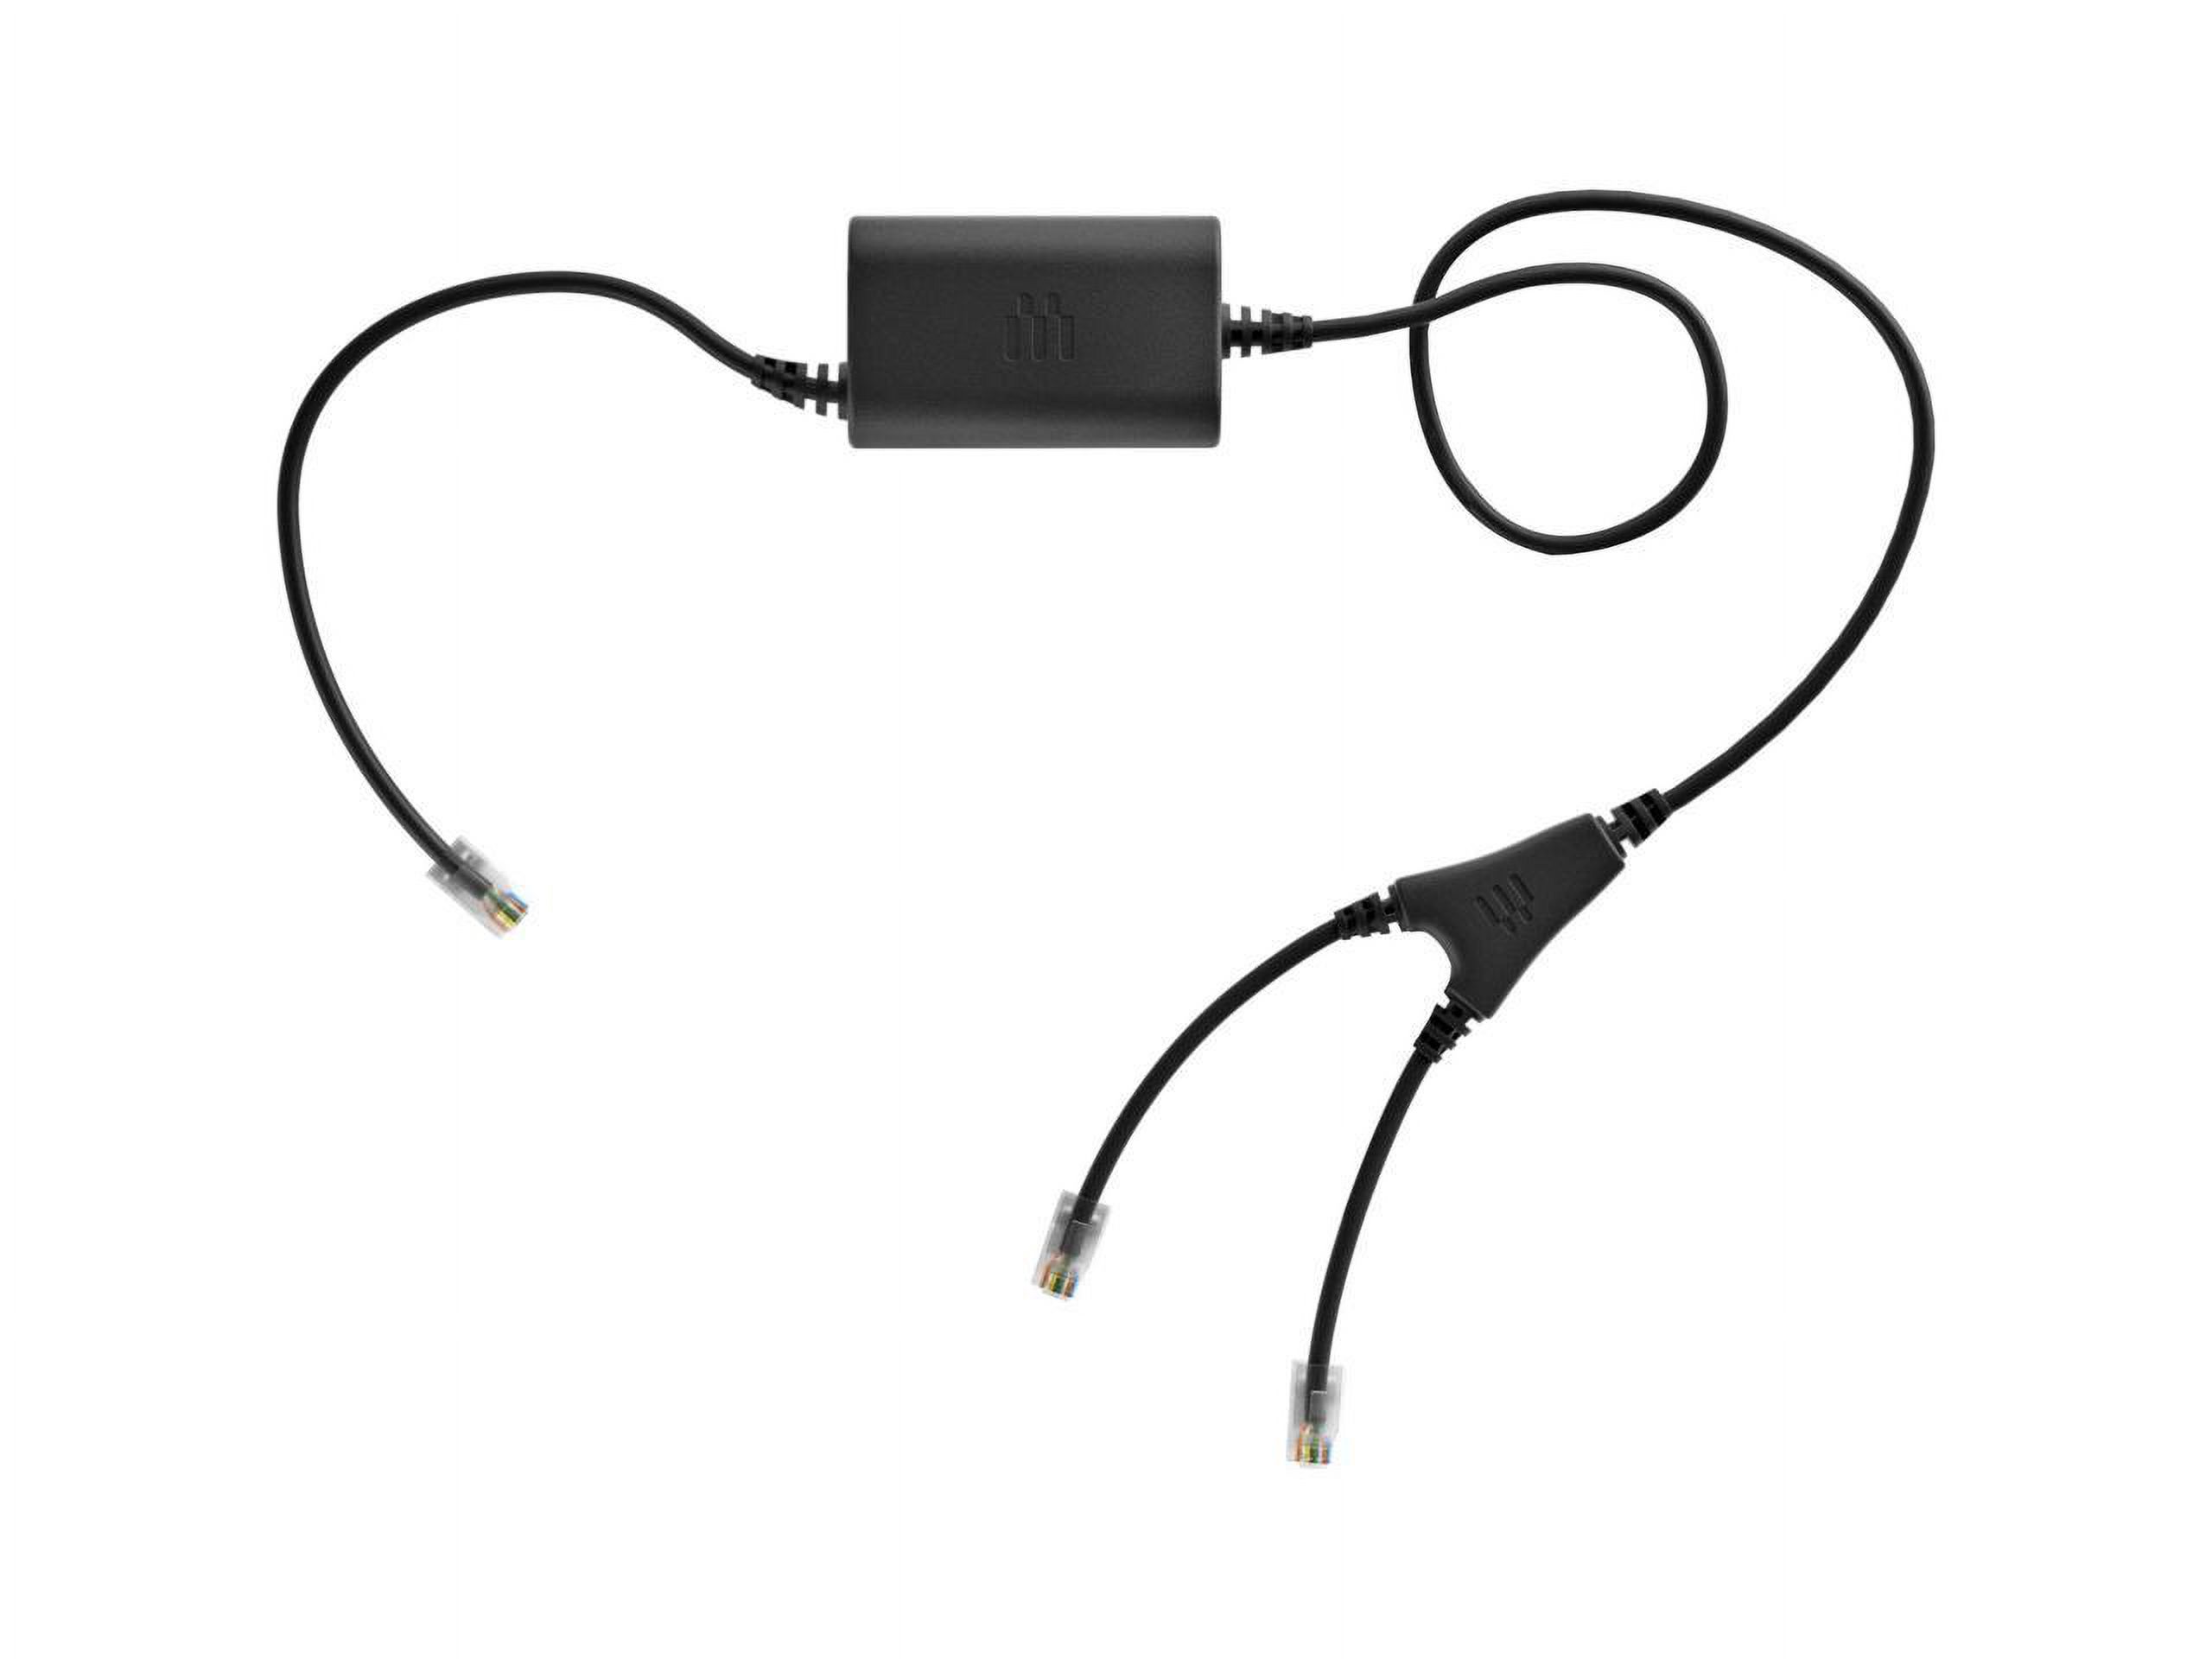 Sennheiser 1000740 9400 & 9500 Series Dect Avaya Adapter Cable for Electronic Hook Switch - image 2 of 3